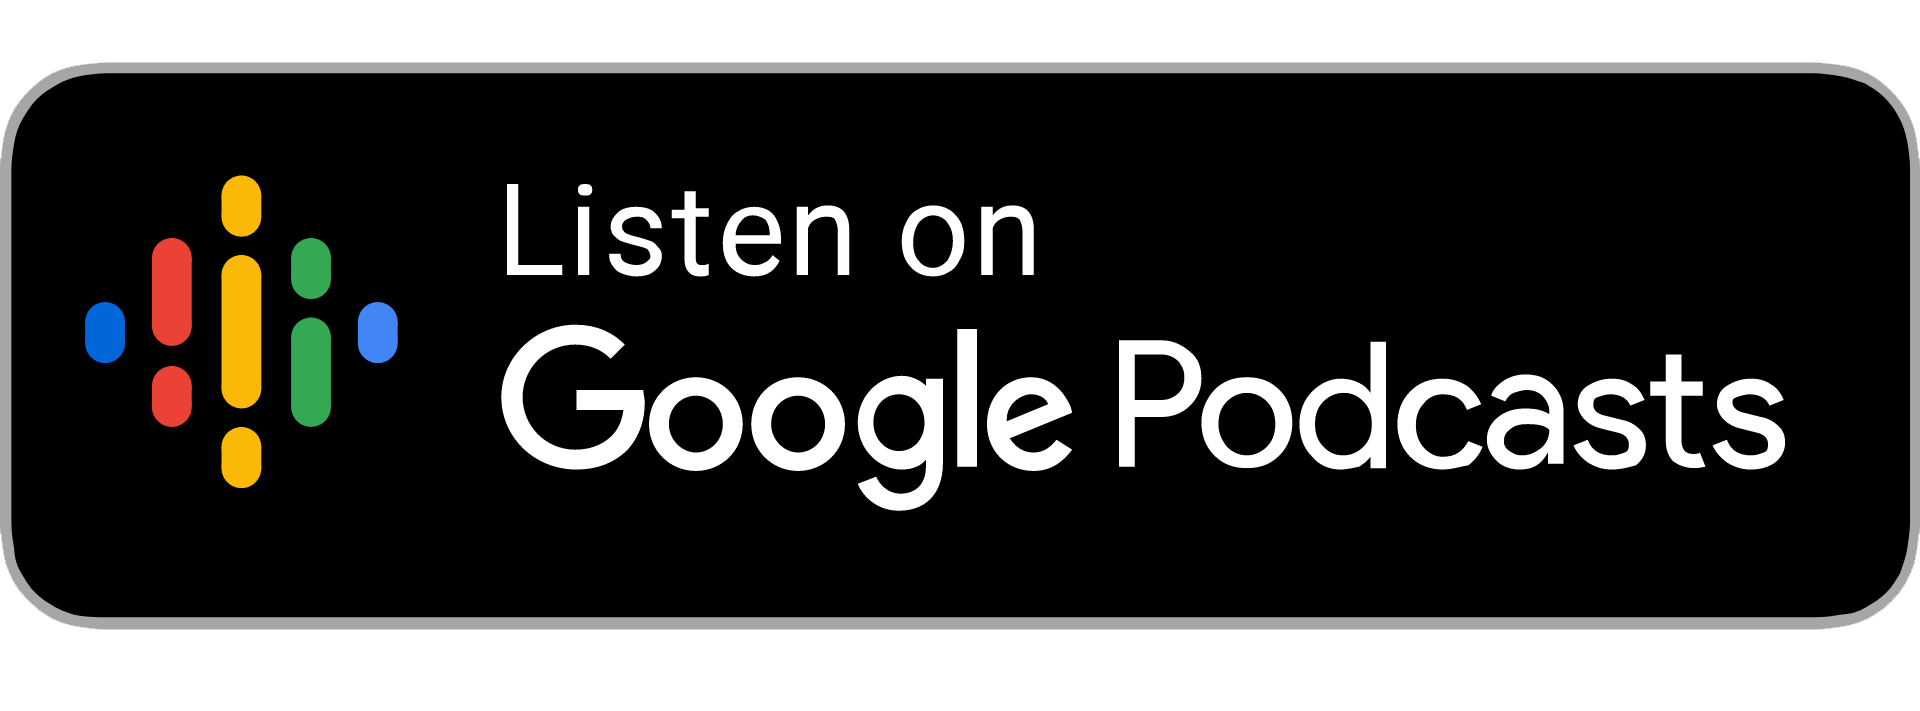 Google-Podcasts.png